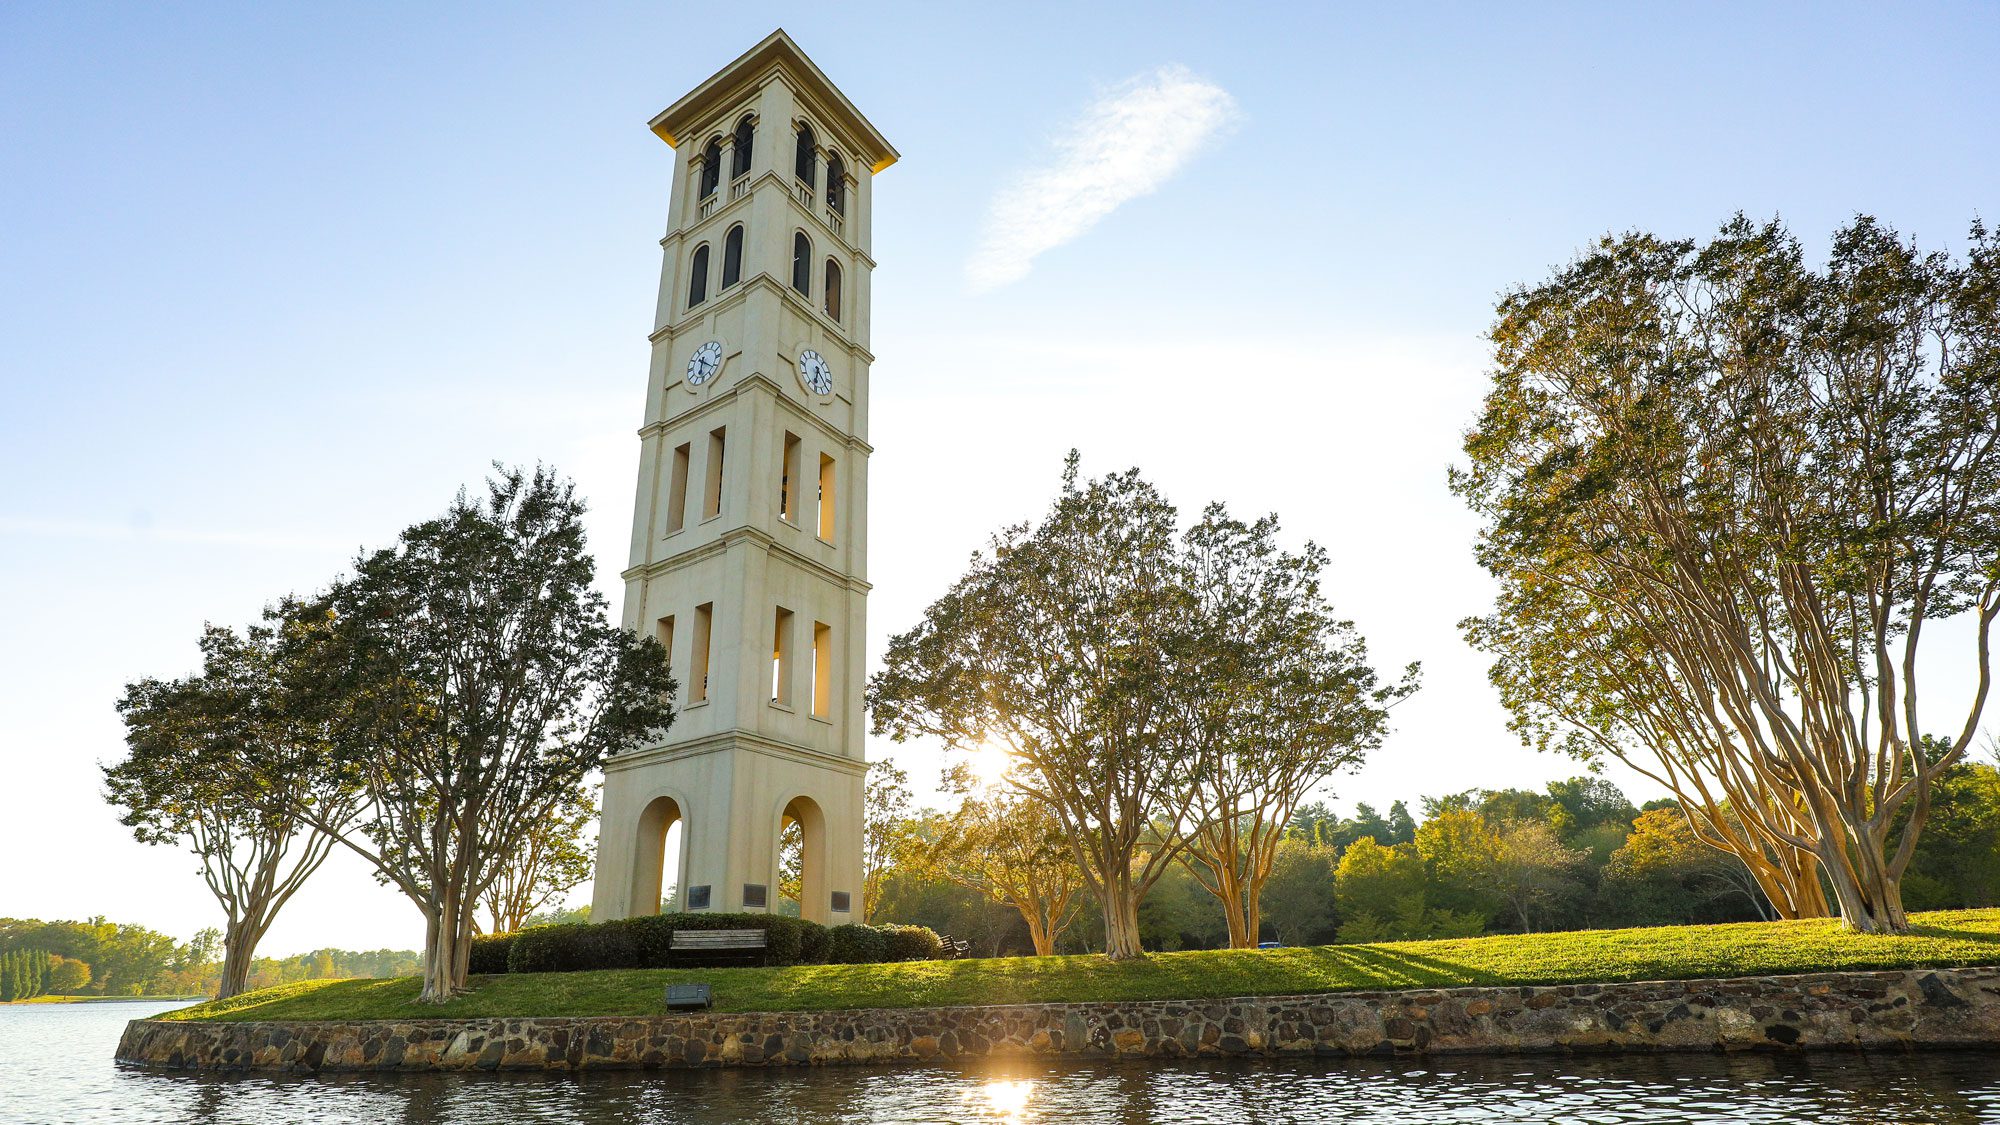 Bell tower from the lake